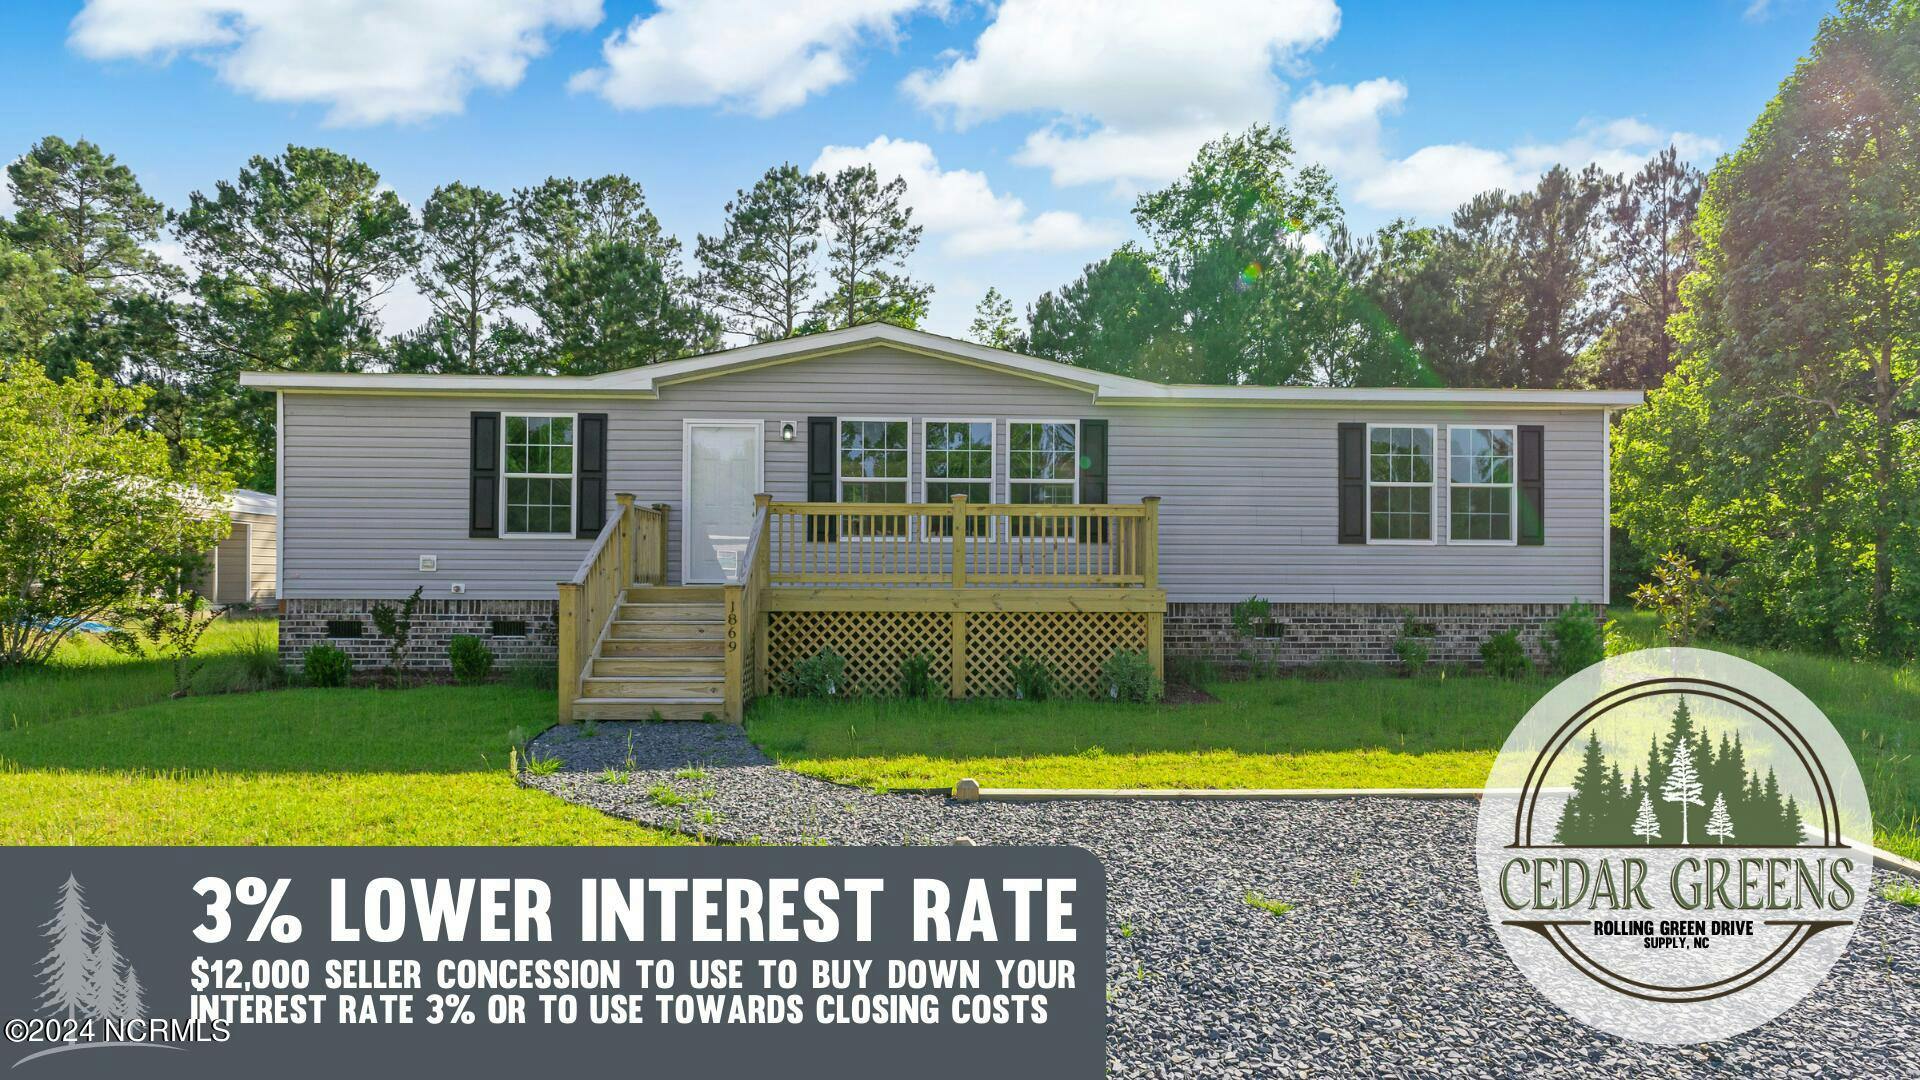 Get a 3% Lower Interest Rate